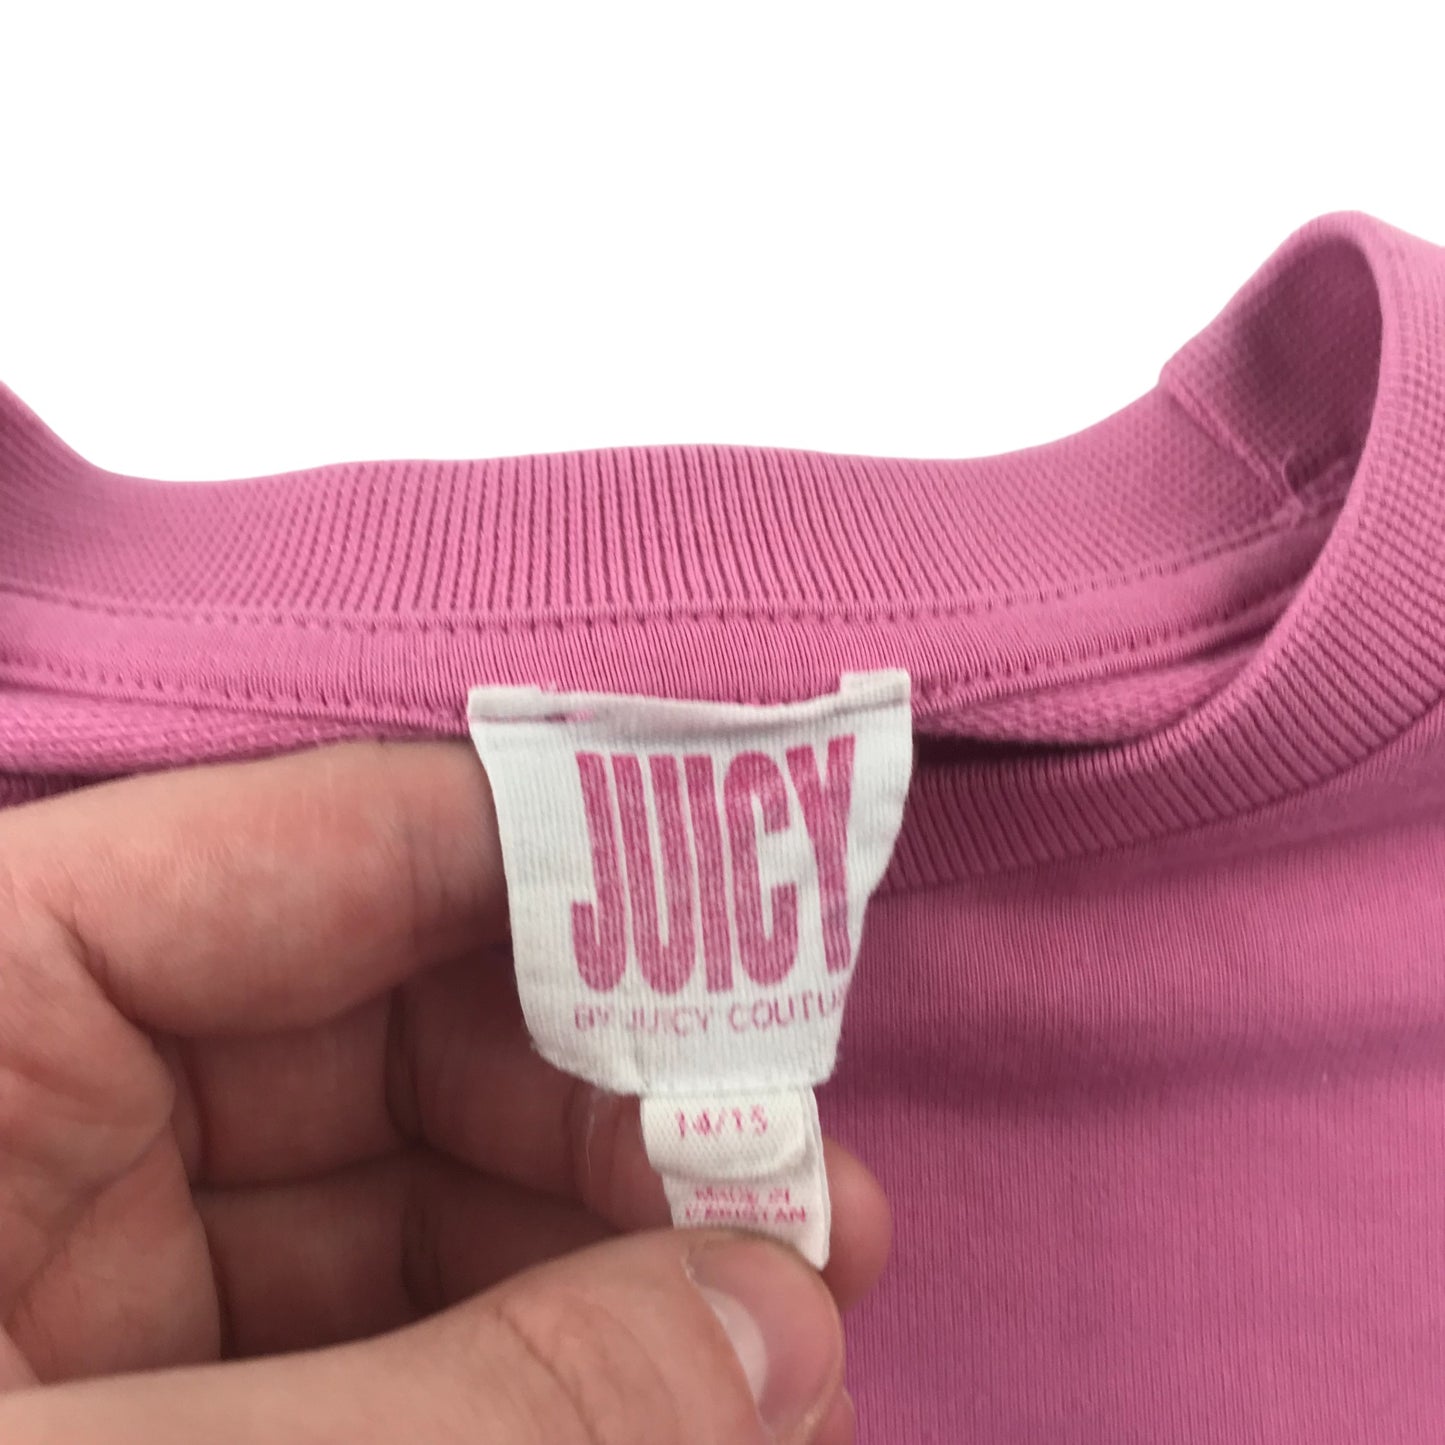 Juicy Couture Sweater and Joggers Set Age 14-15 Pink Crop Sweater and Cuffed Leg Joggers